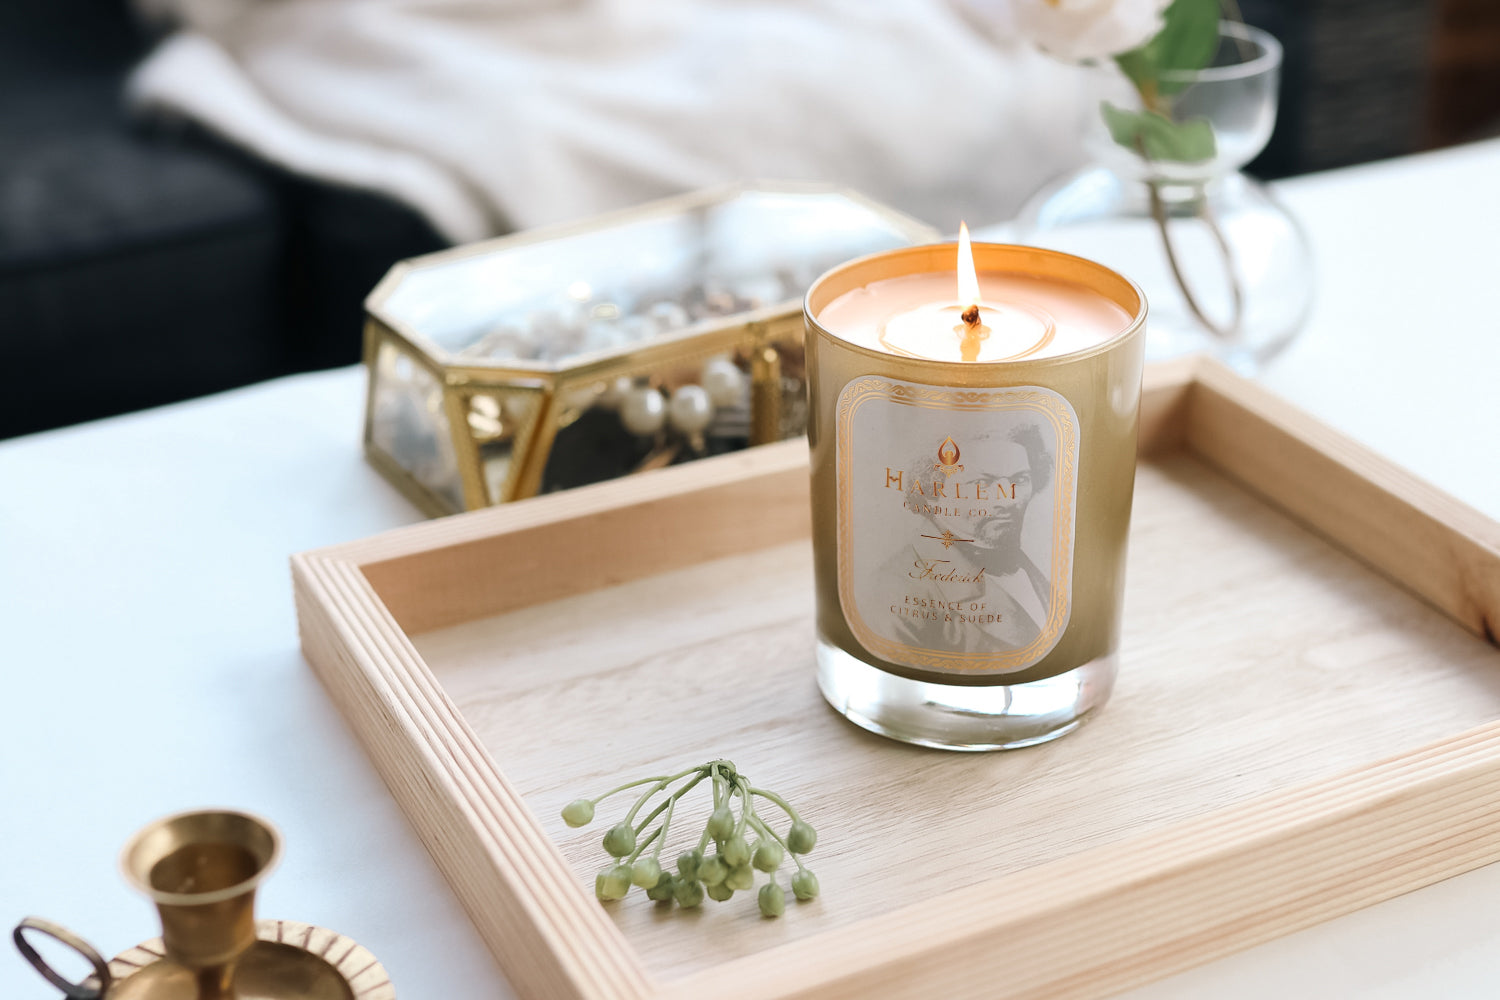 A beautiful lifestyle image of our lit 12 oz Frederick candle sitting on a wooden tray with gold jewelry and gold candle holders.